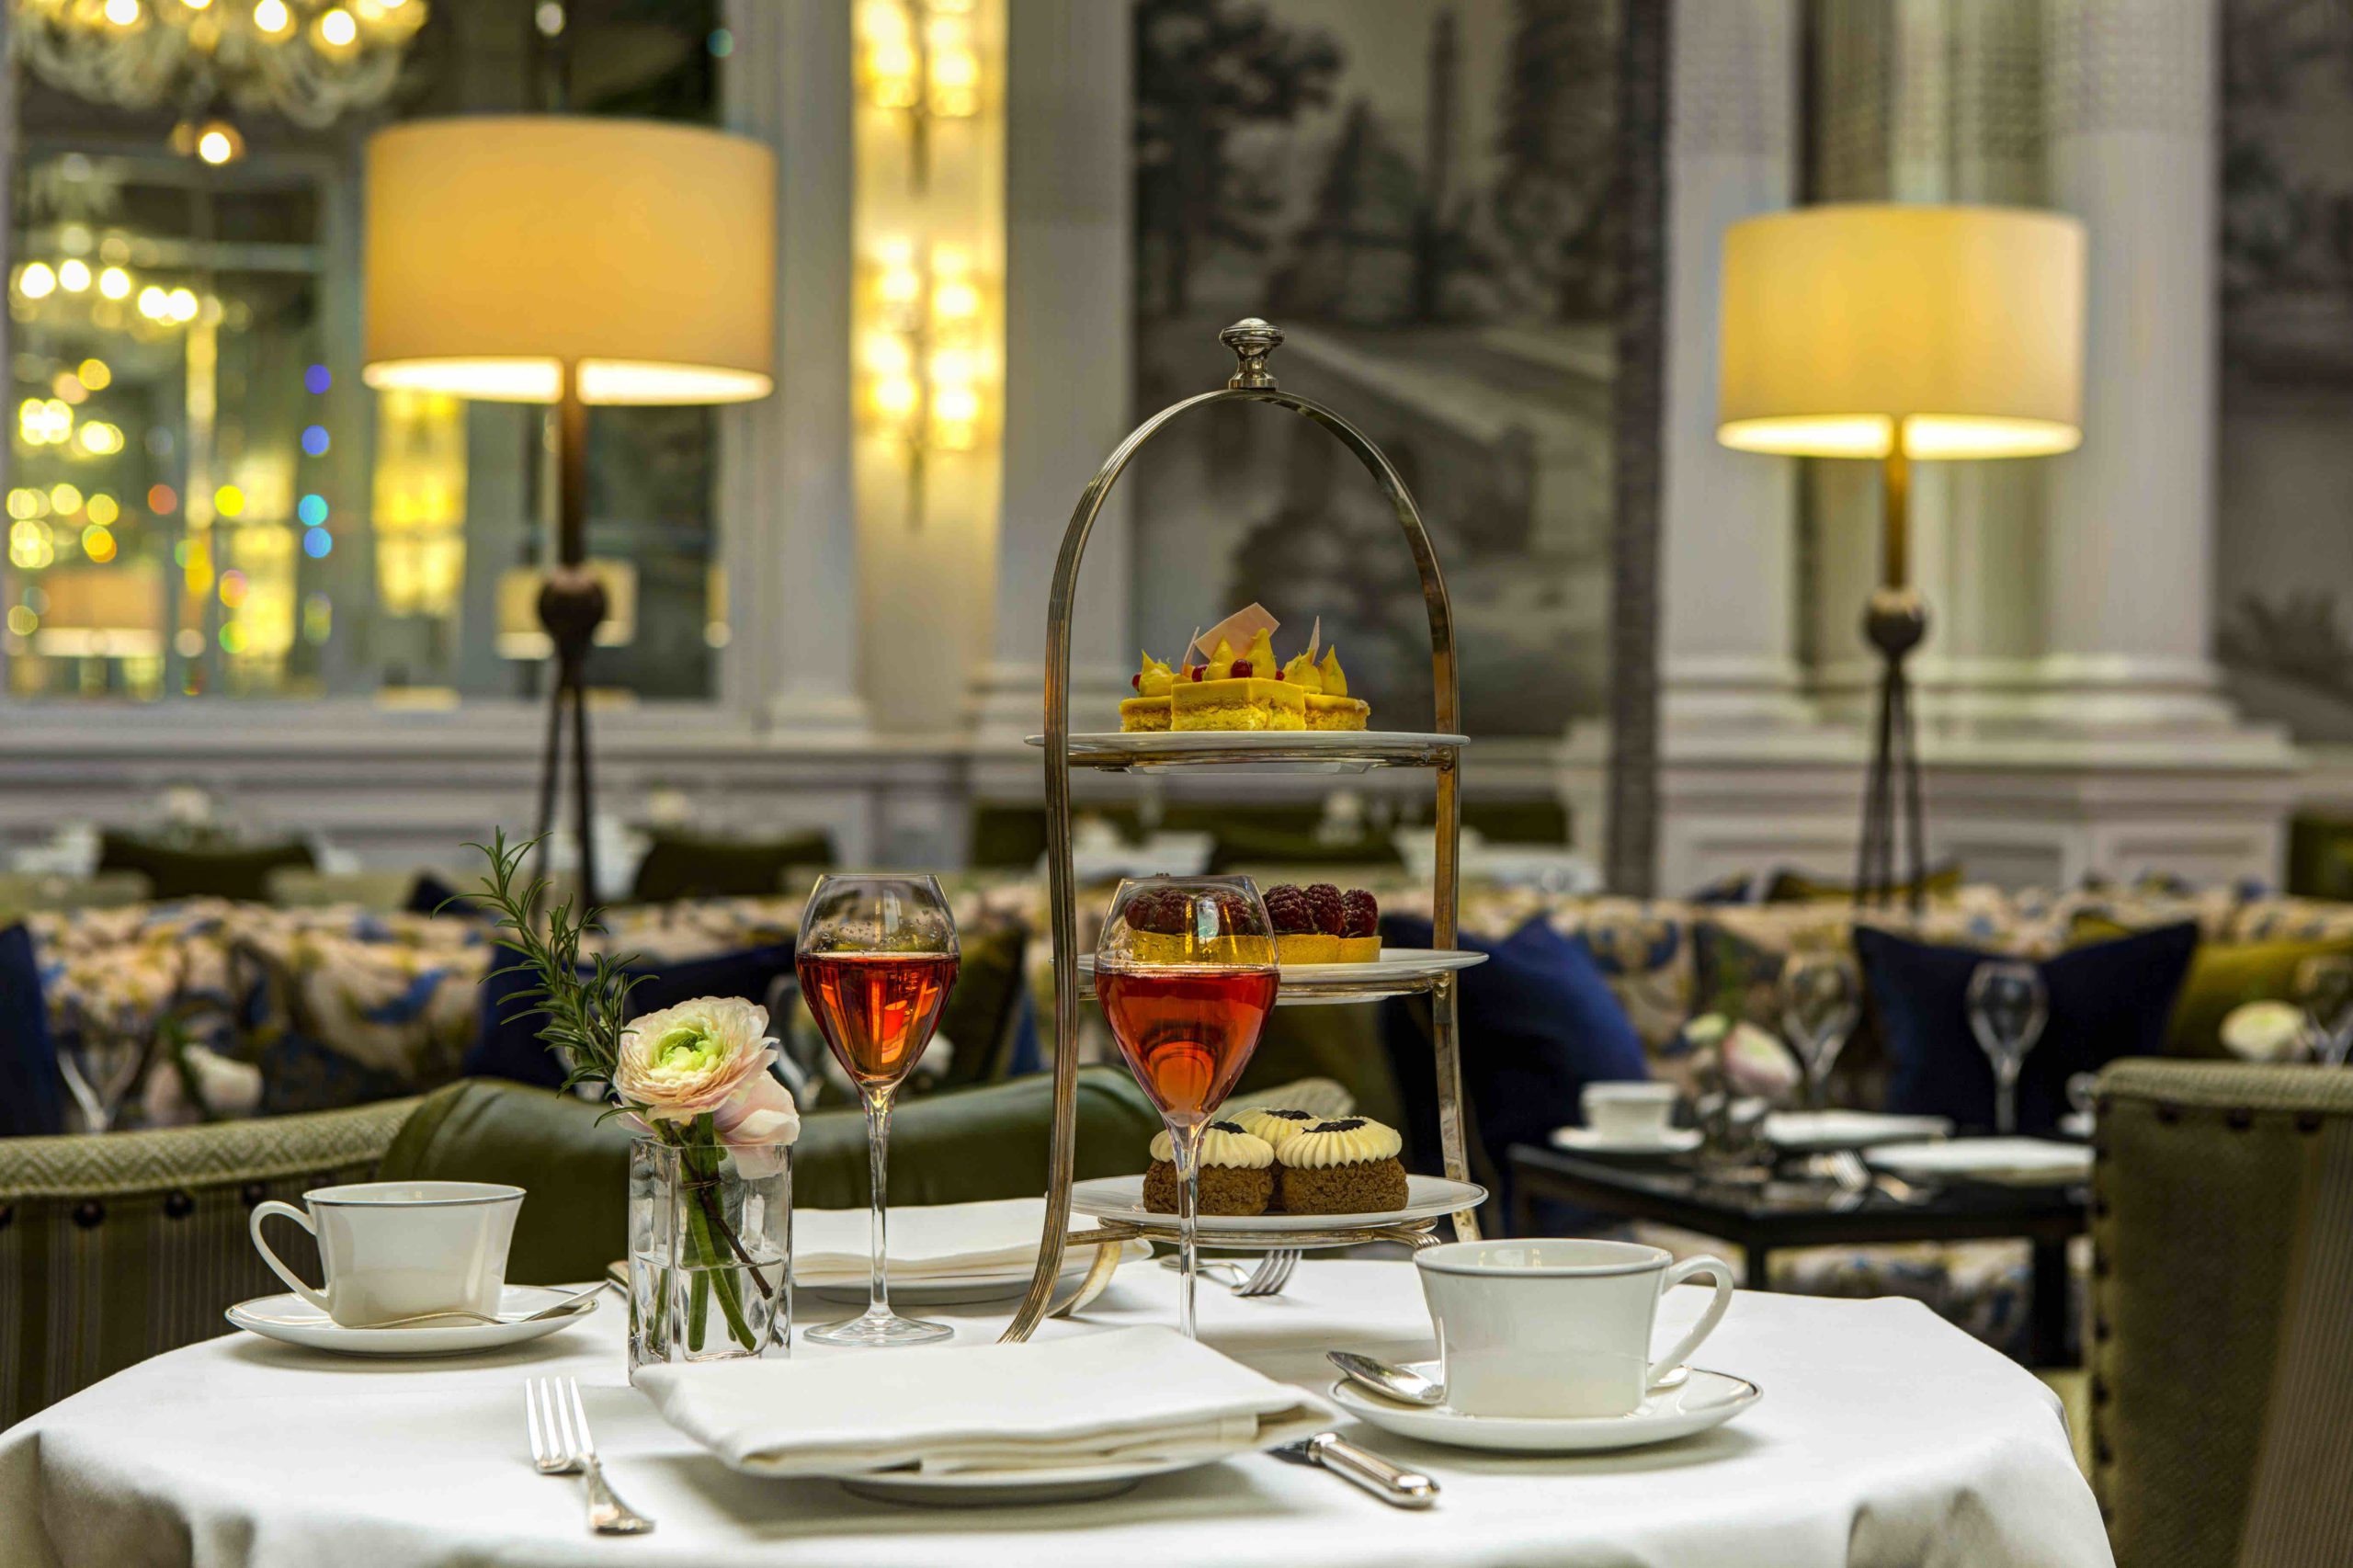 The Balmoral - Afternoon Tea at Palm Court